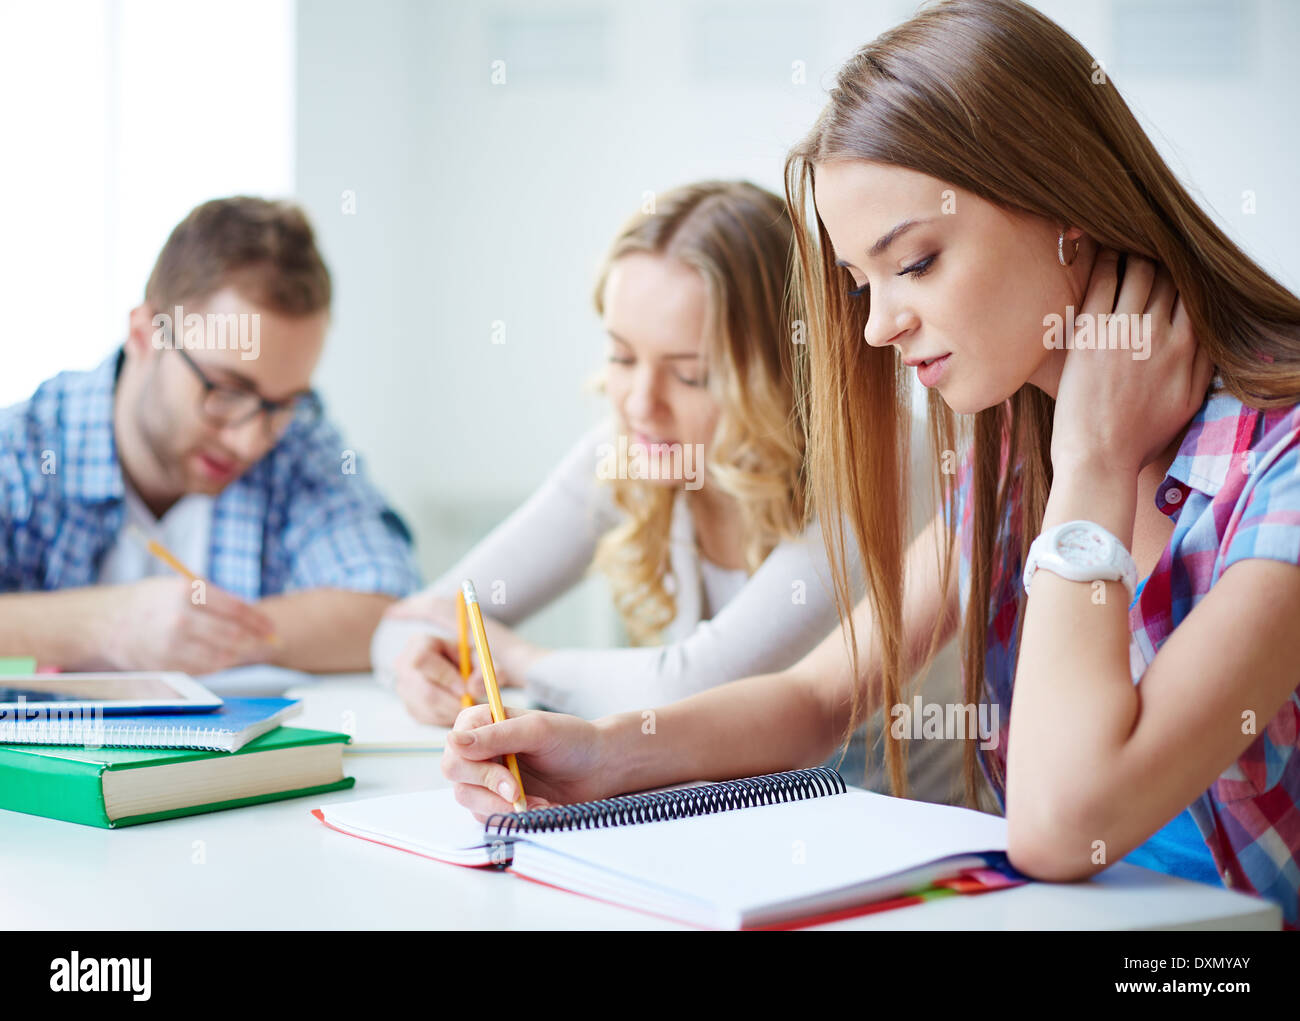 Smart girl carrying out written task with her groupmates on background Stock Photo